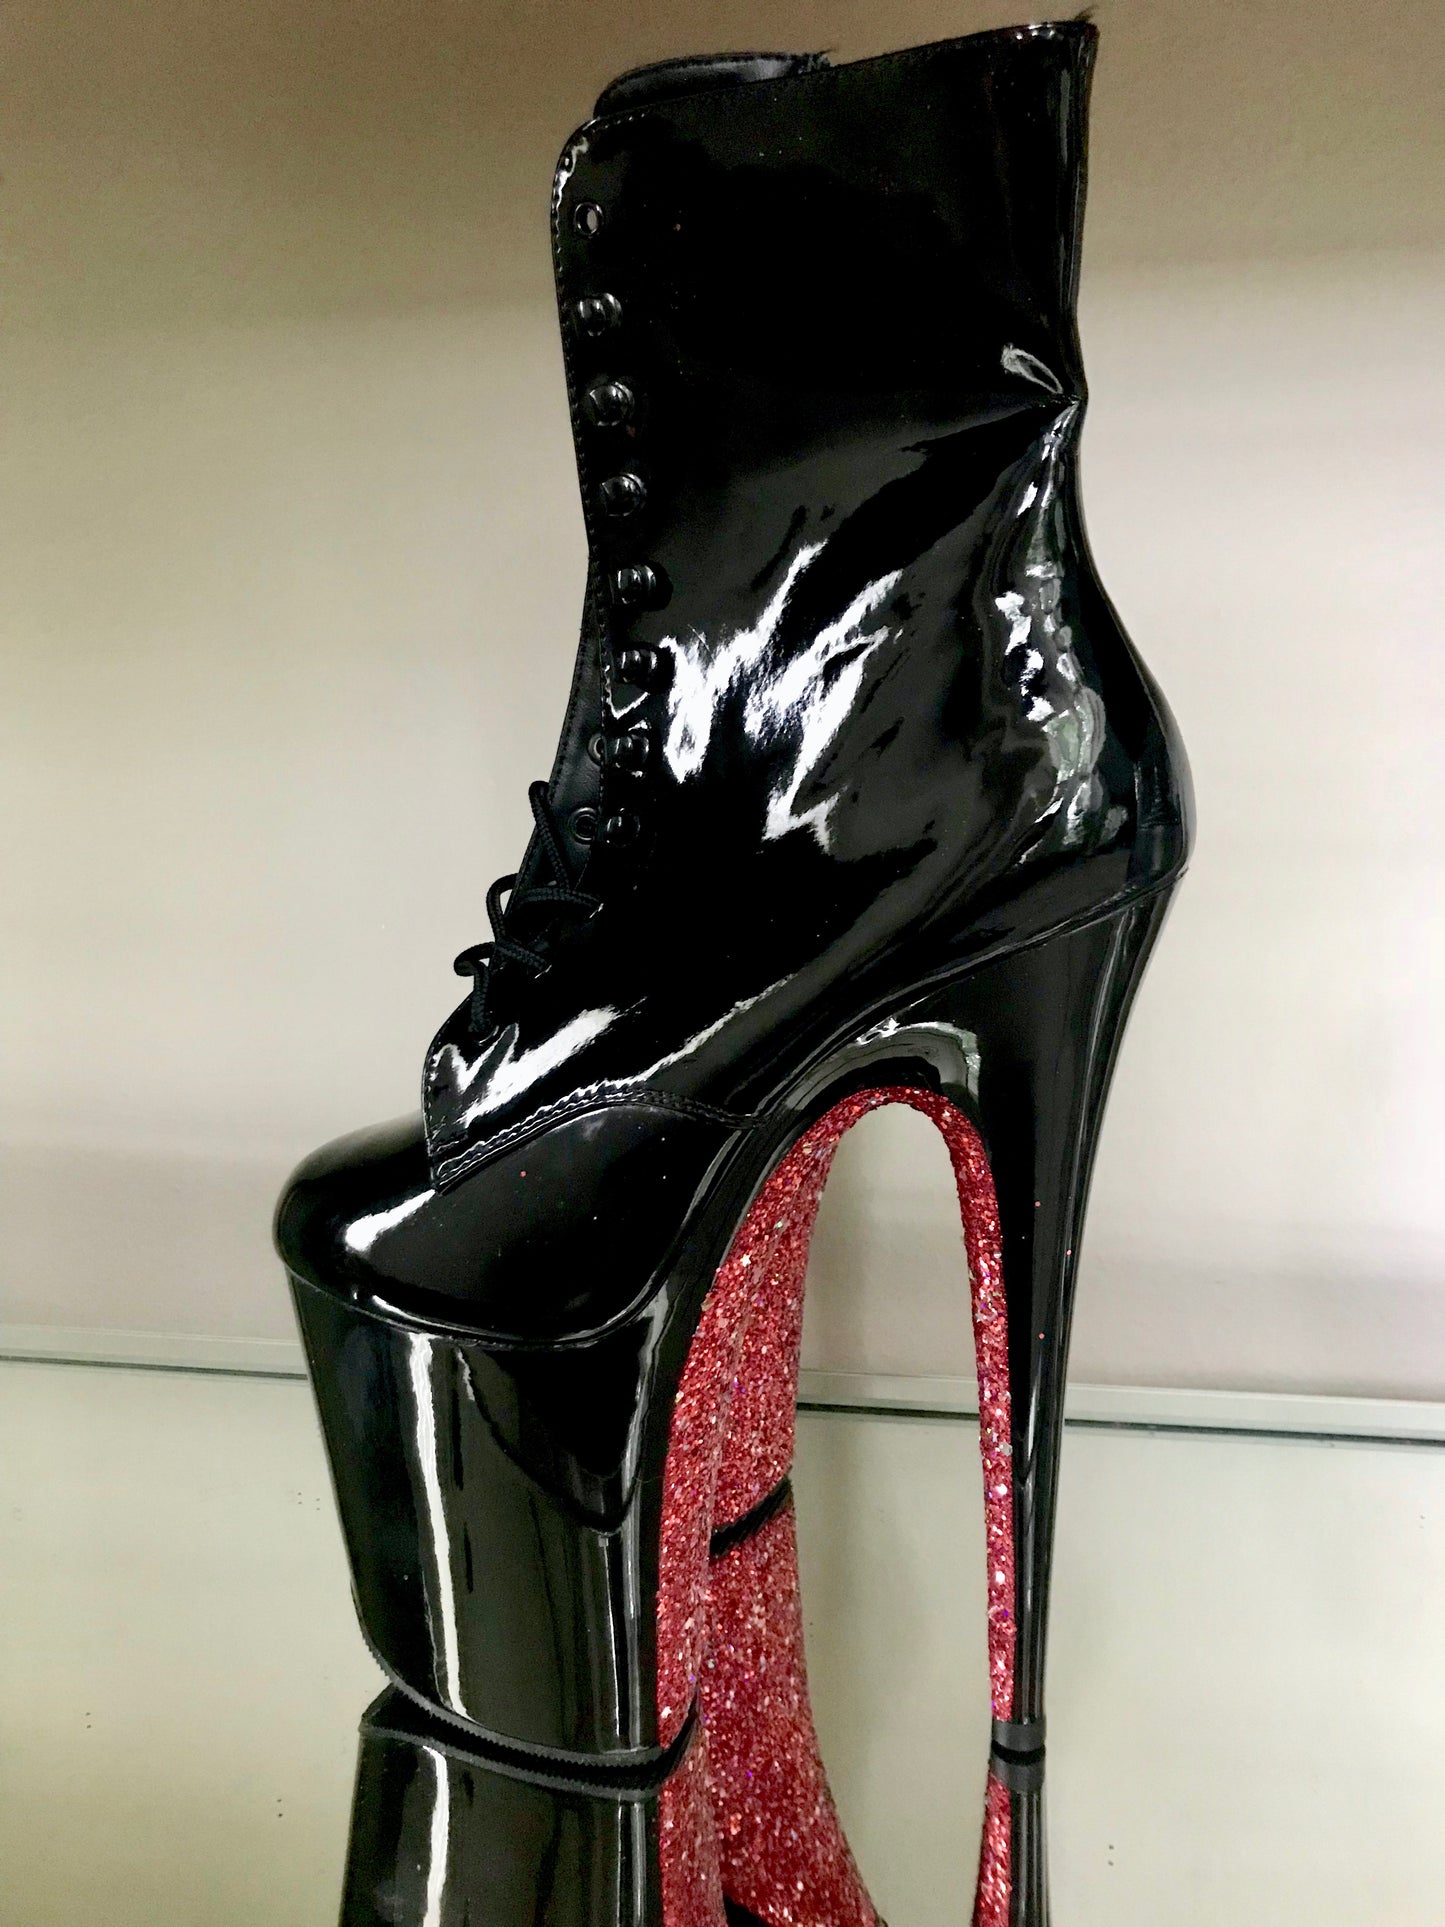 Black patent platform boots with black laces, and inside zipper. Red glitter on the arches and inside of heels.